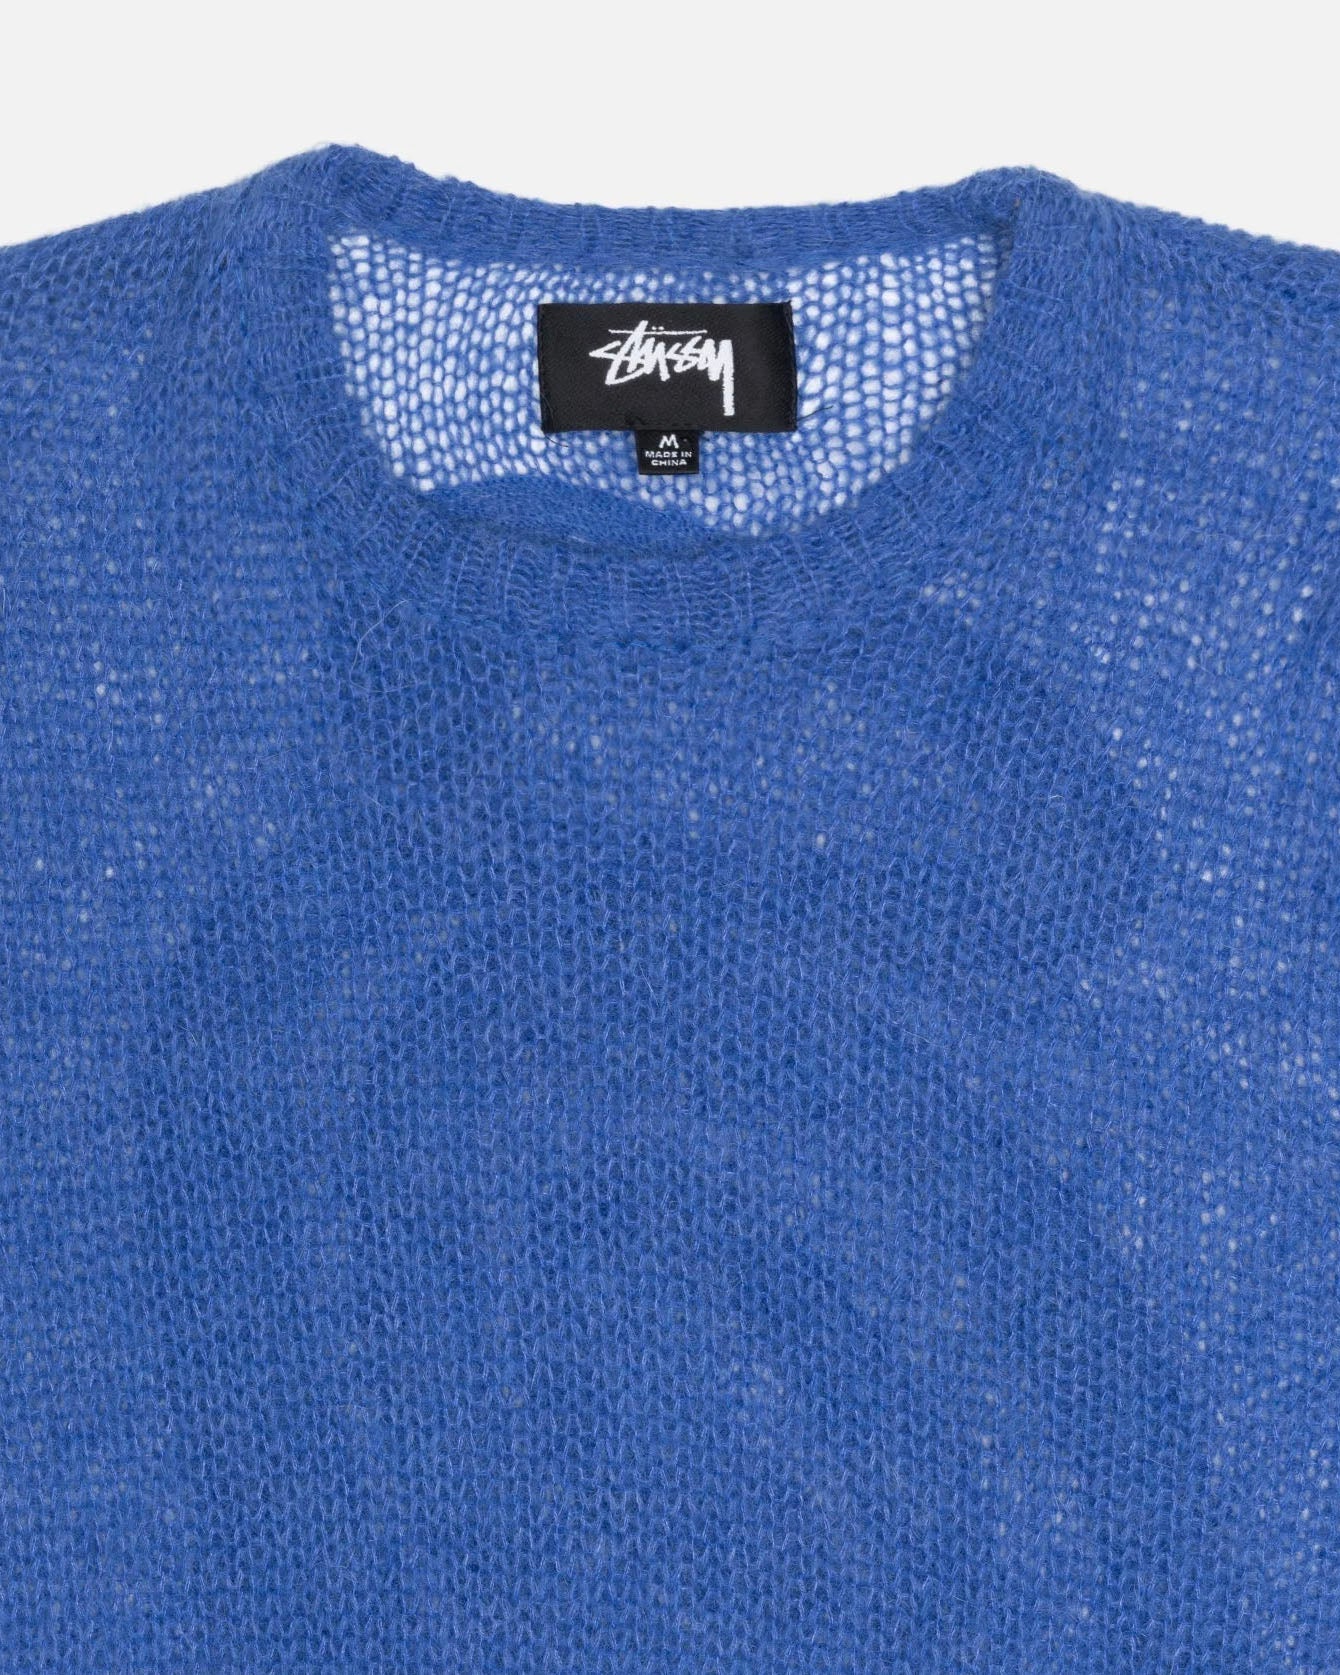 S Knit Loose Sweater Blue